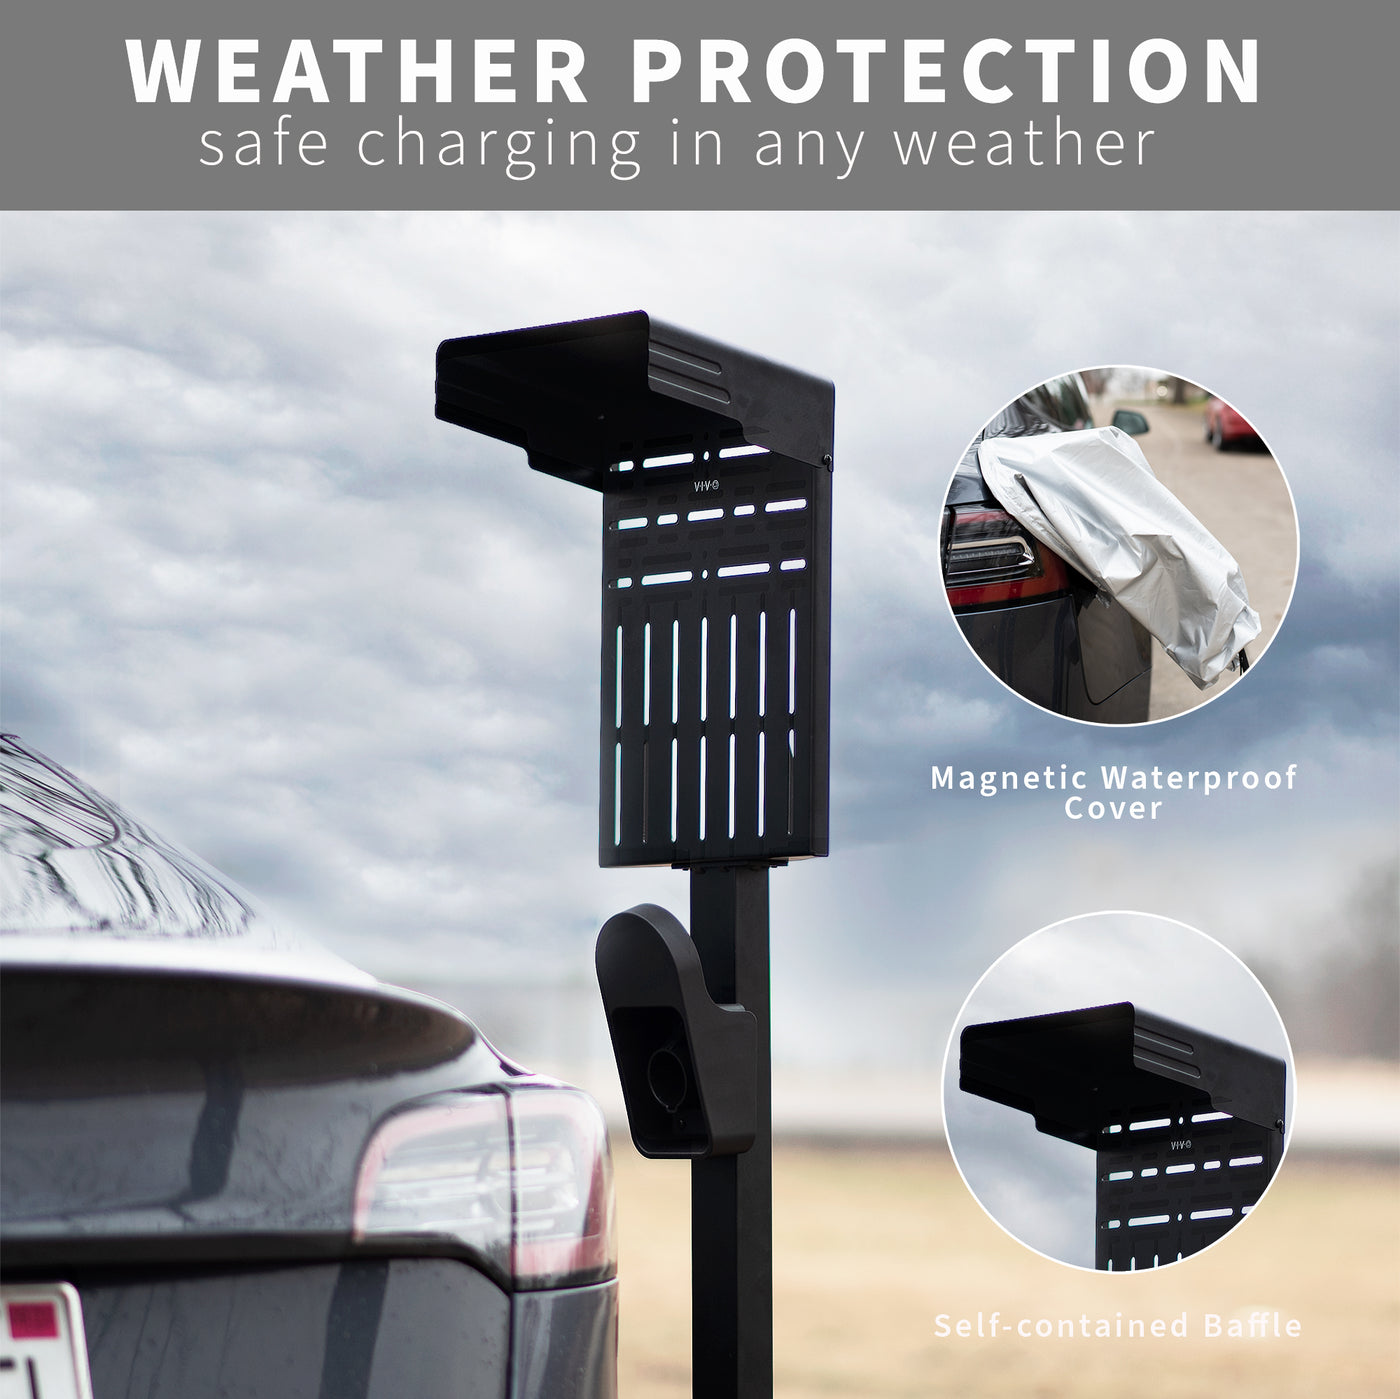 Safely charge your EV with a magnetic cover protecting charge in any weather conditions.